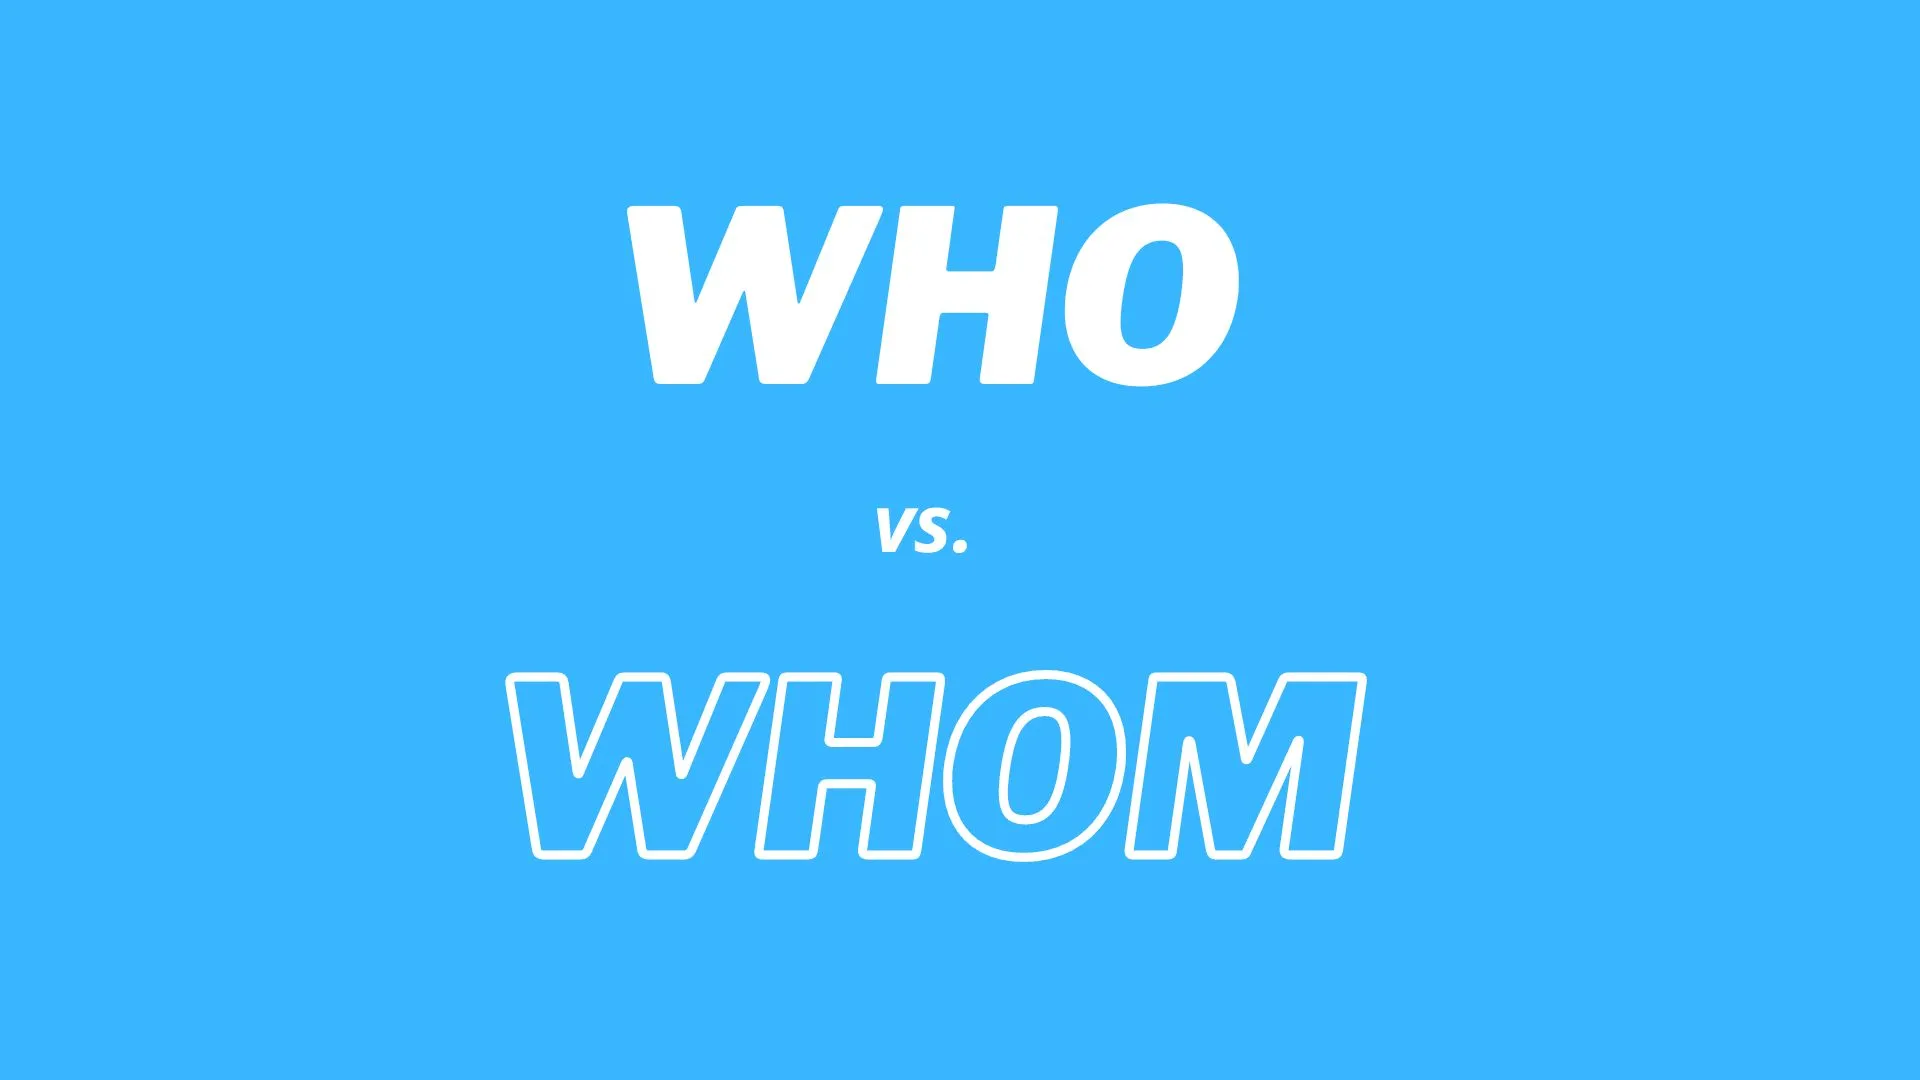 Written explenation of difference between "who" and "whom" with examples.